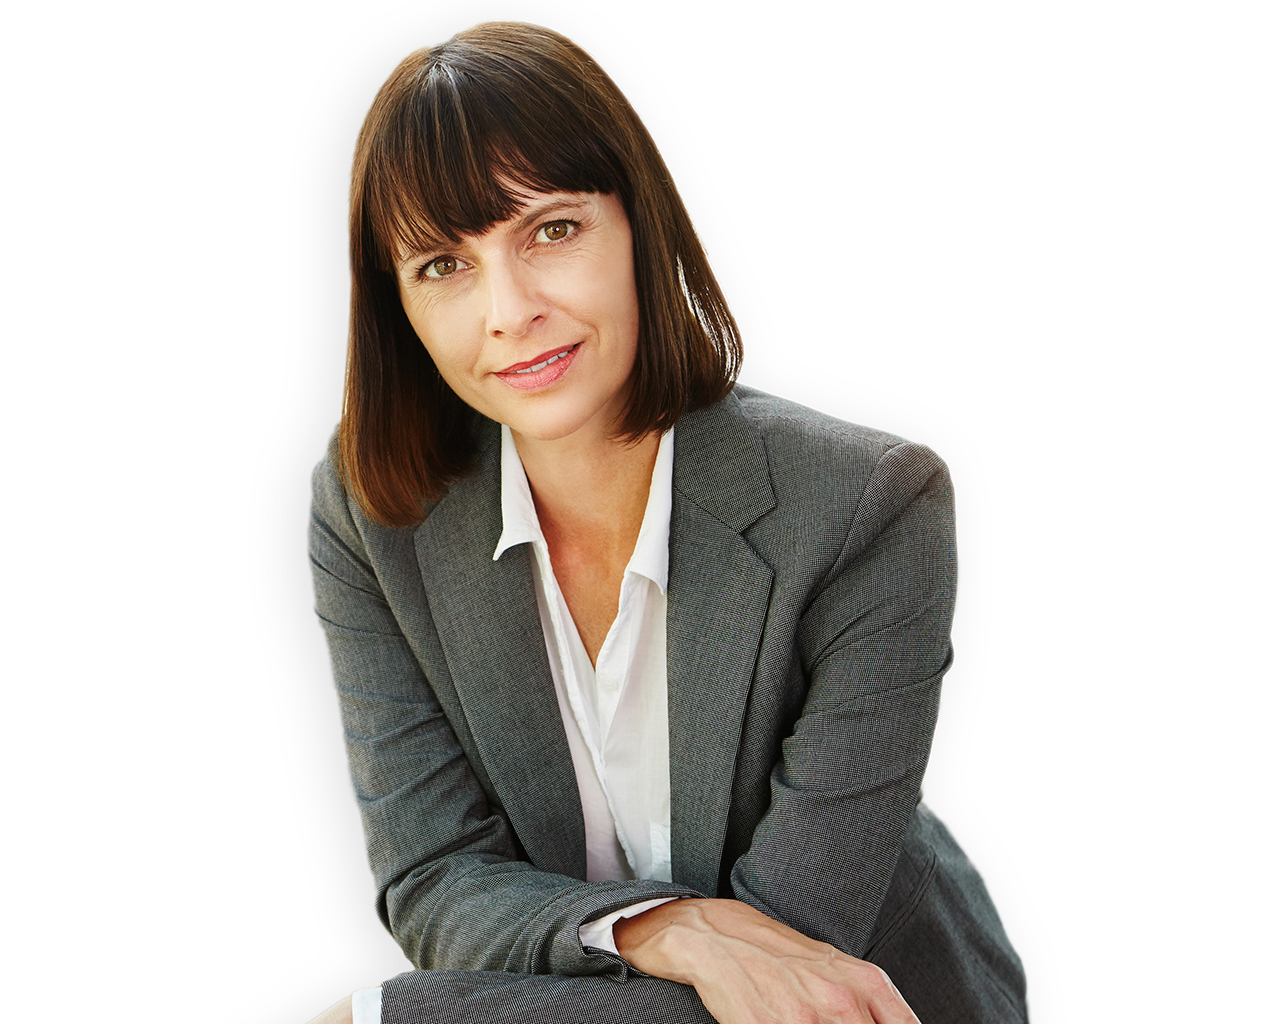 Portrait of successful business woman standing with arms crossed looking confident